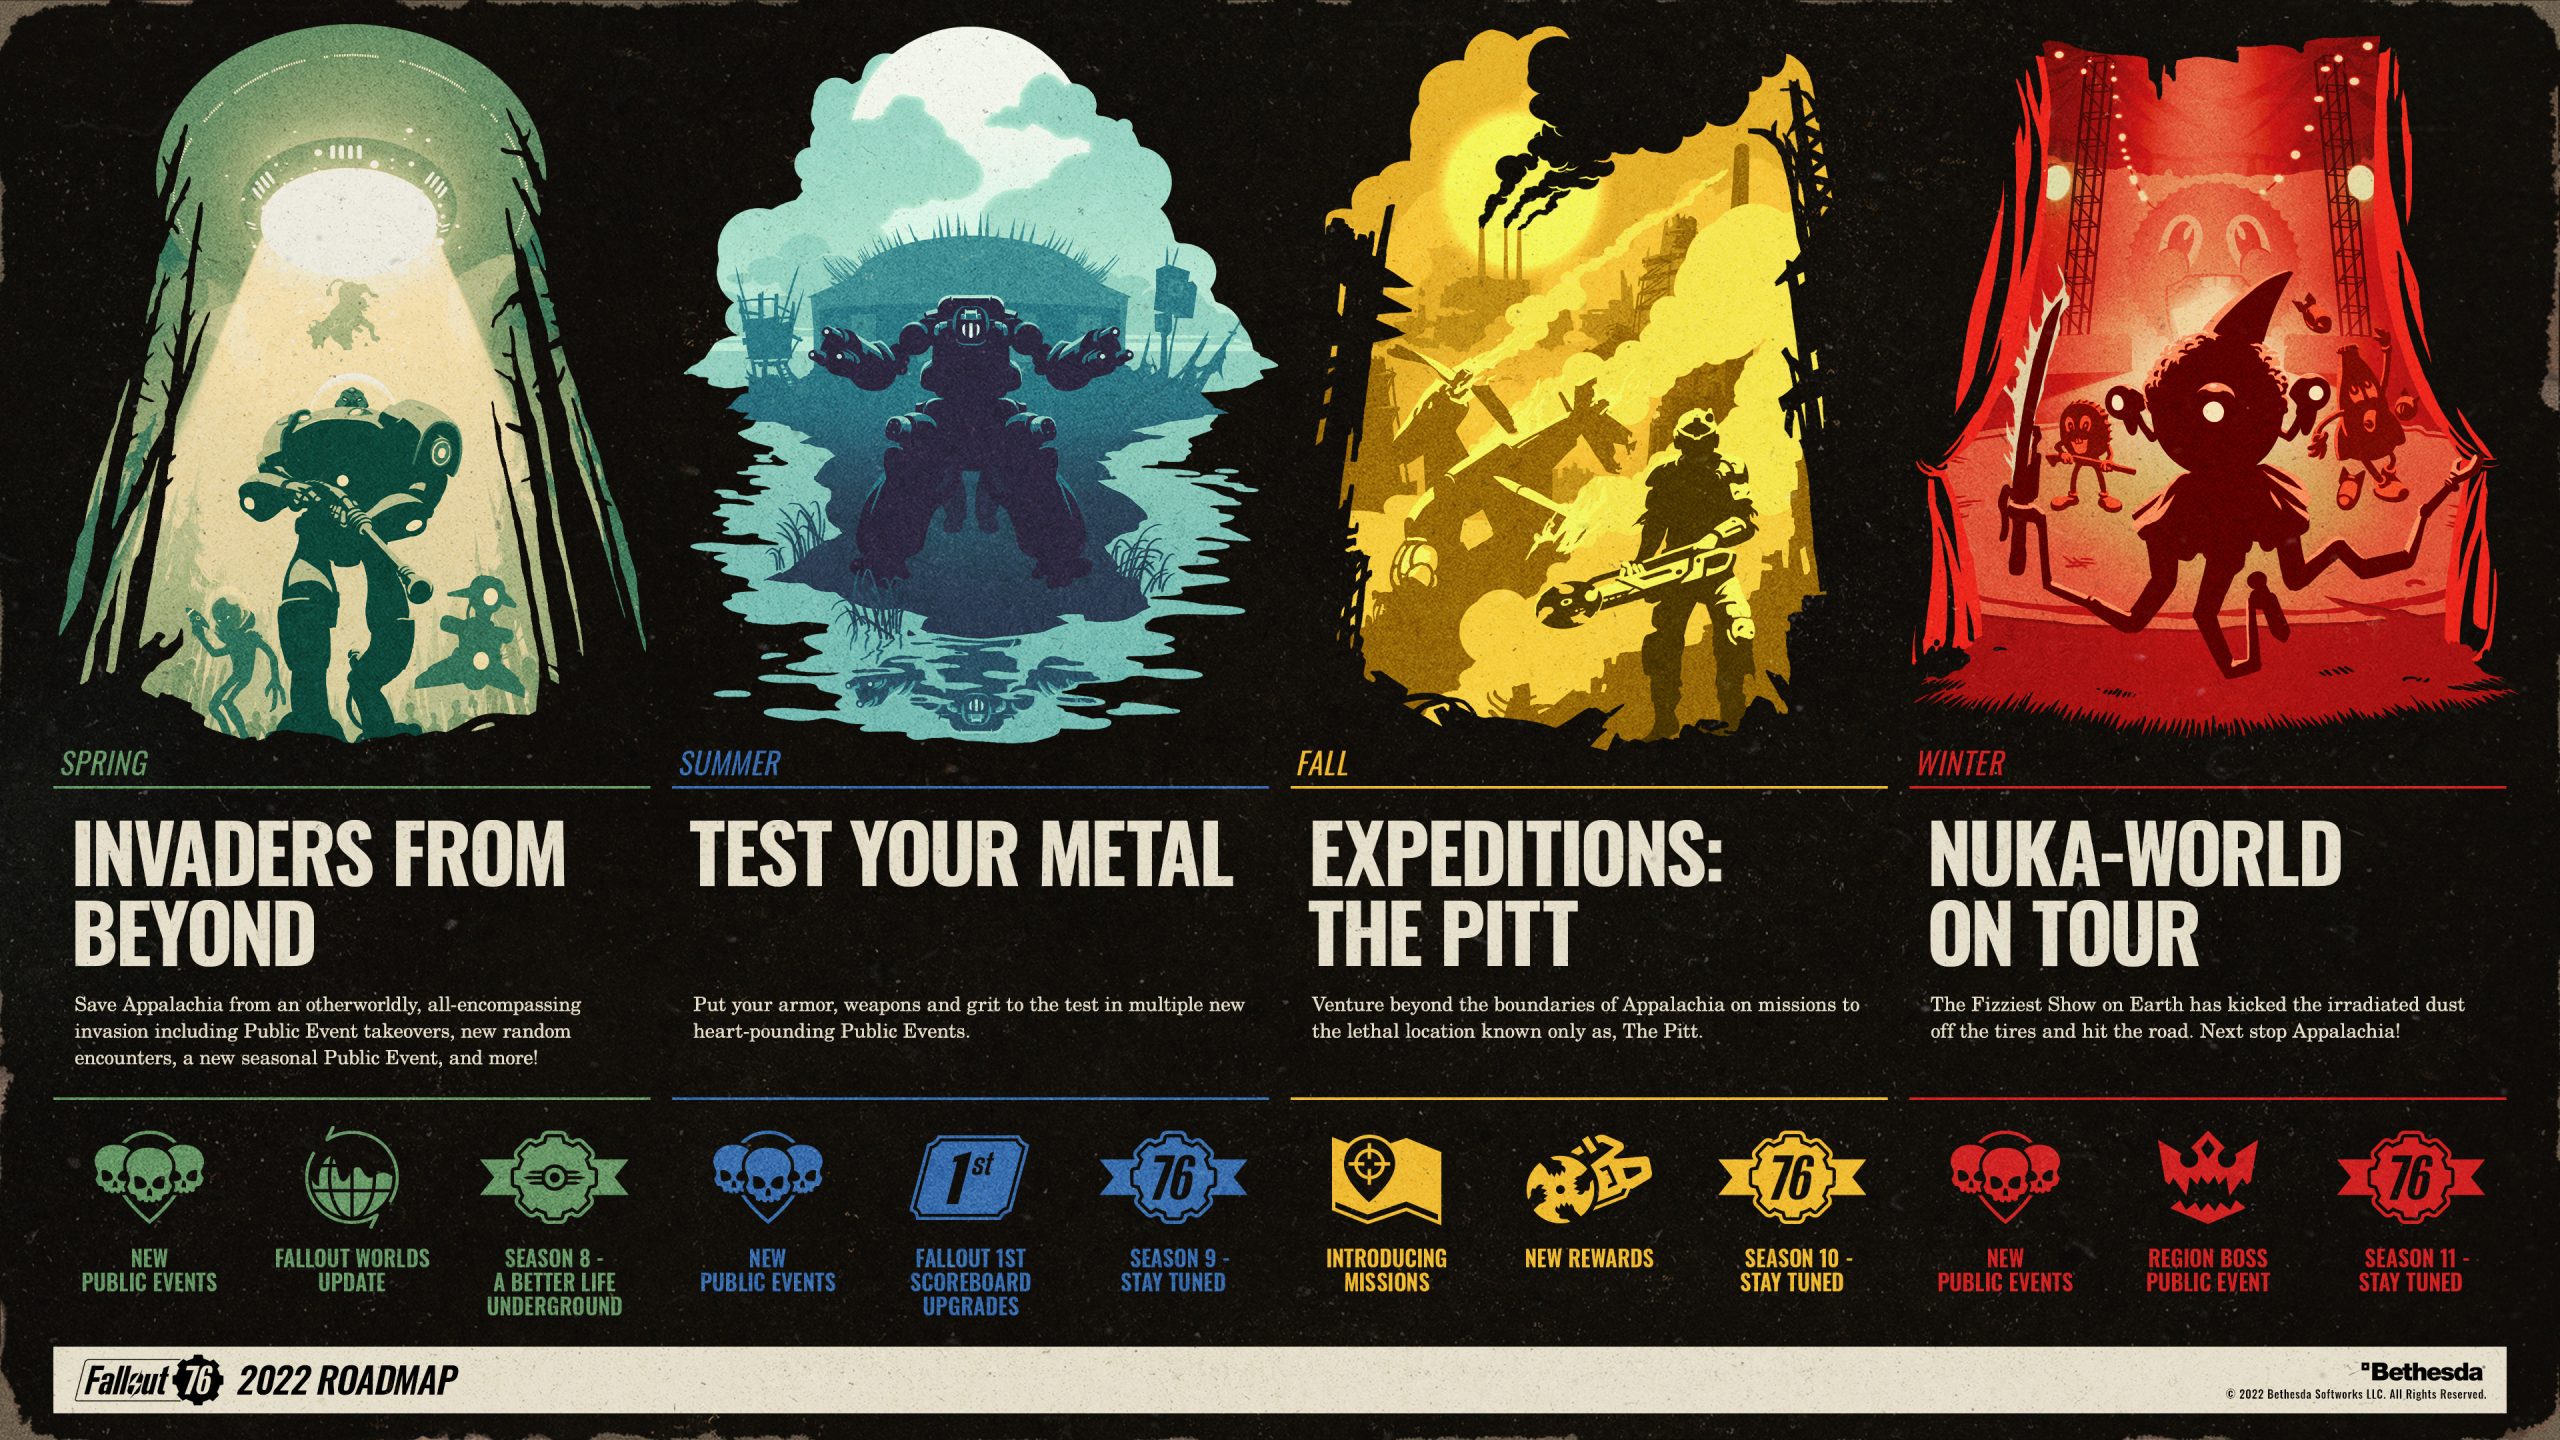 Fallout 76 roadmap includes The Pitt, aliens and NukaWorld on Tour